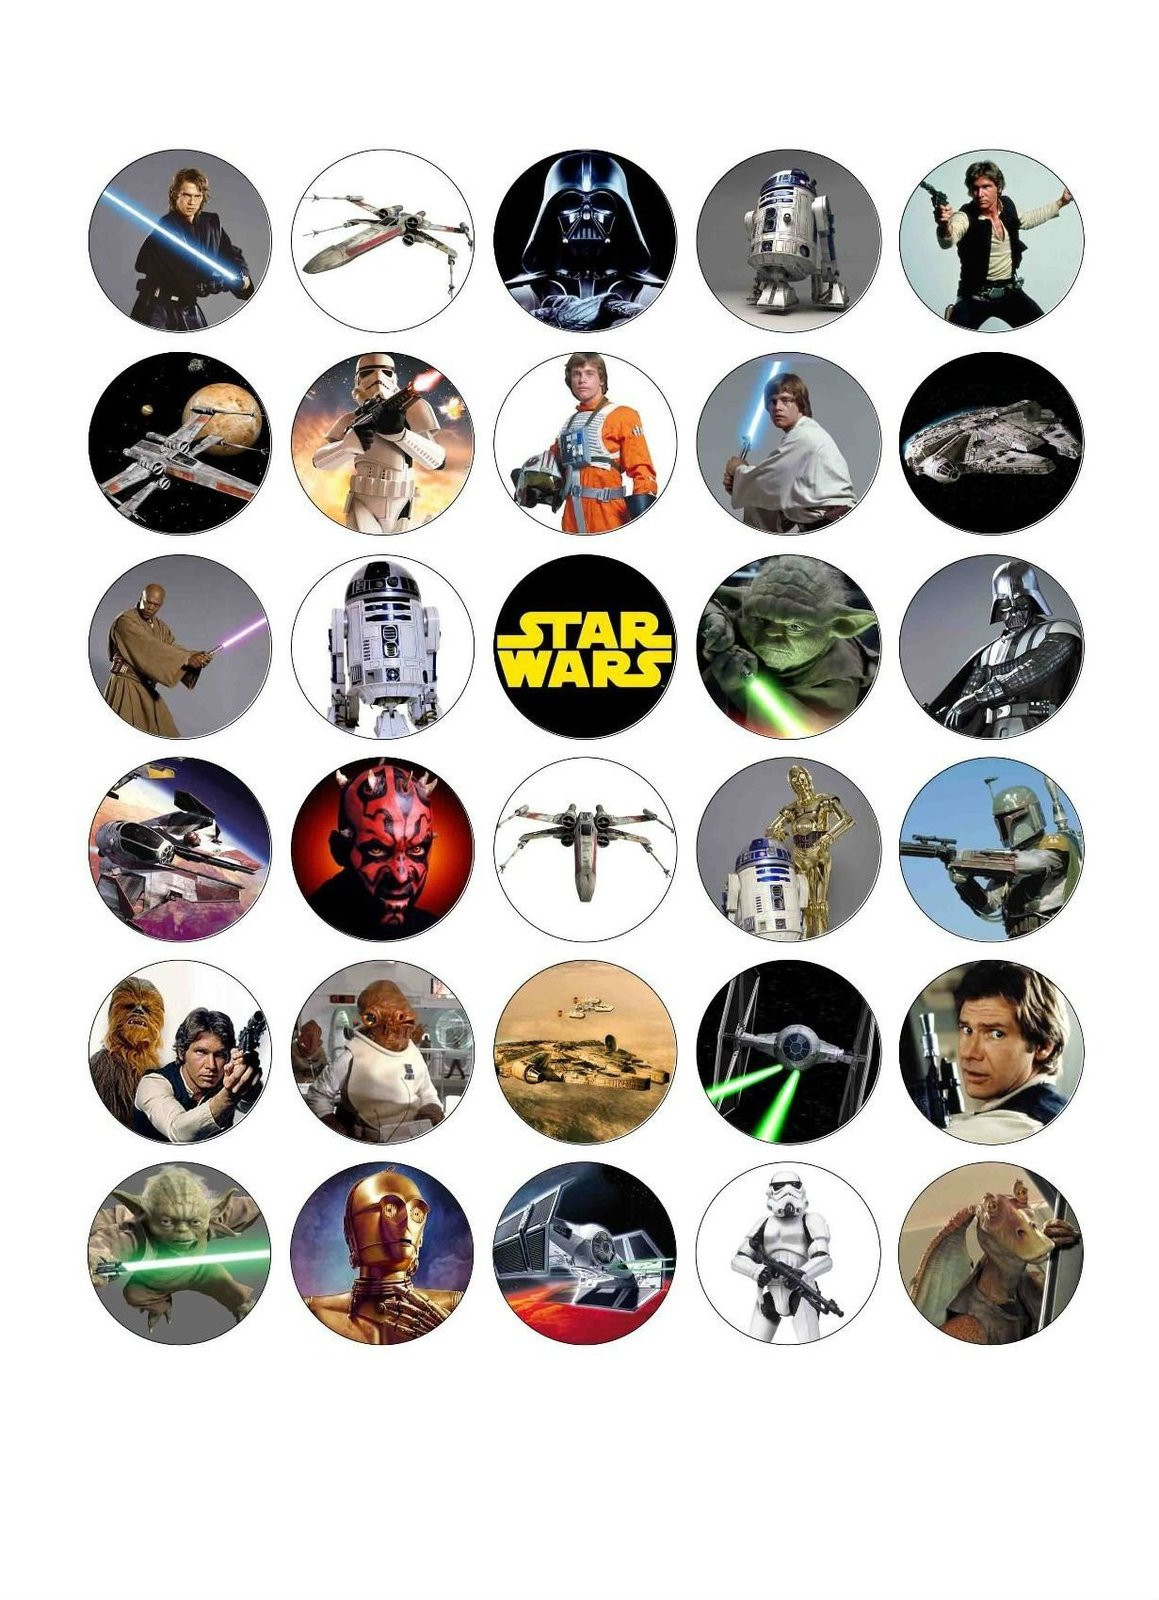 Star Wars Birthday Cake Toppers
 30 X STAR WARS Edible Wafer Paper Cupcake cake toppers